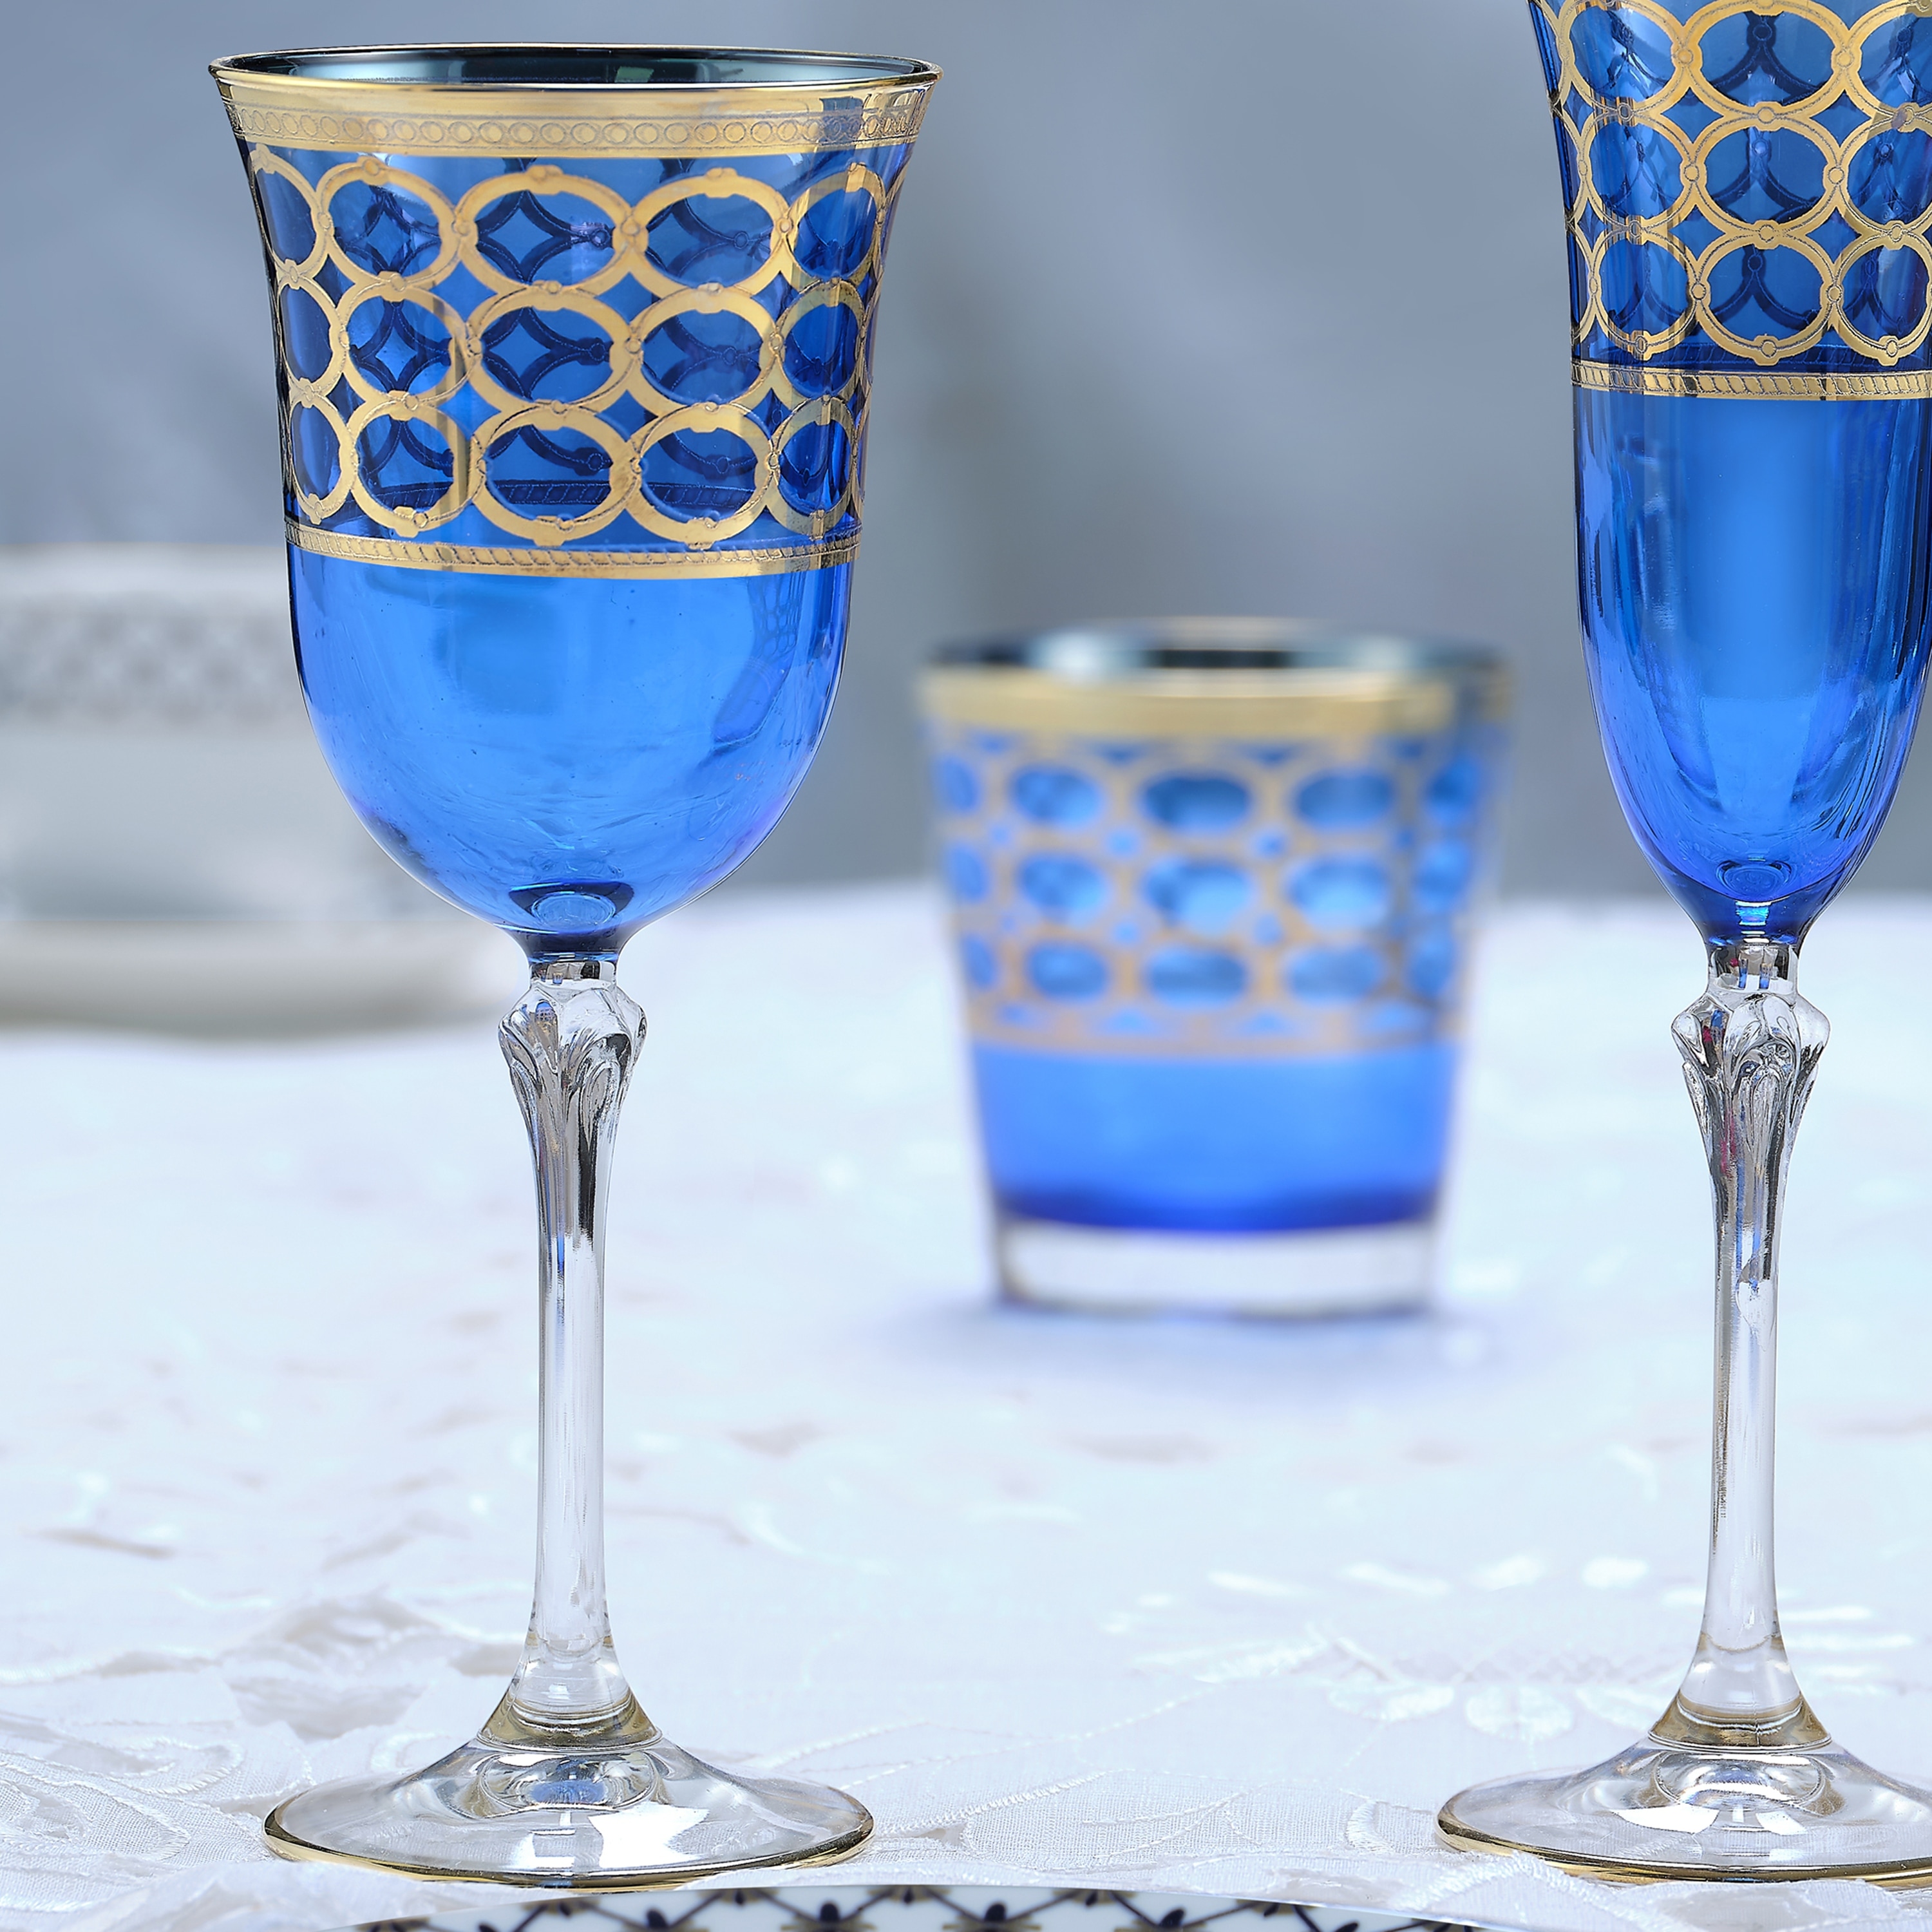 https://ak1.ostkcdn.com/images/products/is/images/direct/405c2ef007f572efb2bc6f67eff2f09ef2ffa7f0/Lorren-Home-Trends-Cobalt-Blue-White-Wine-Goblet-with-Gold-Rings%2C-Set-of-4.jpg